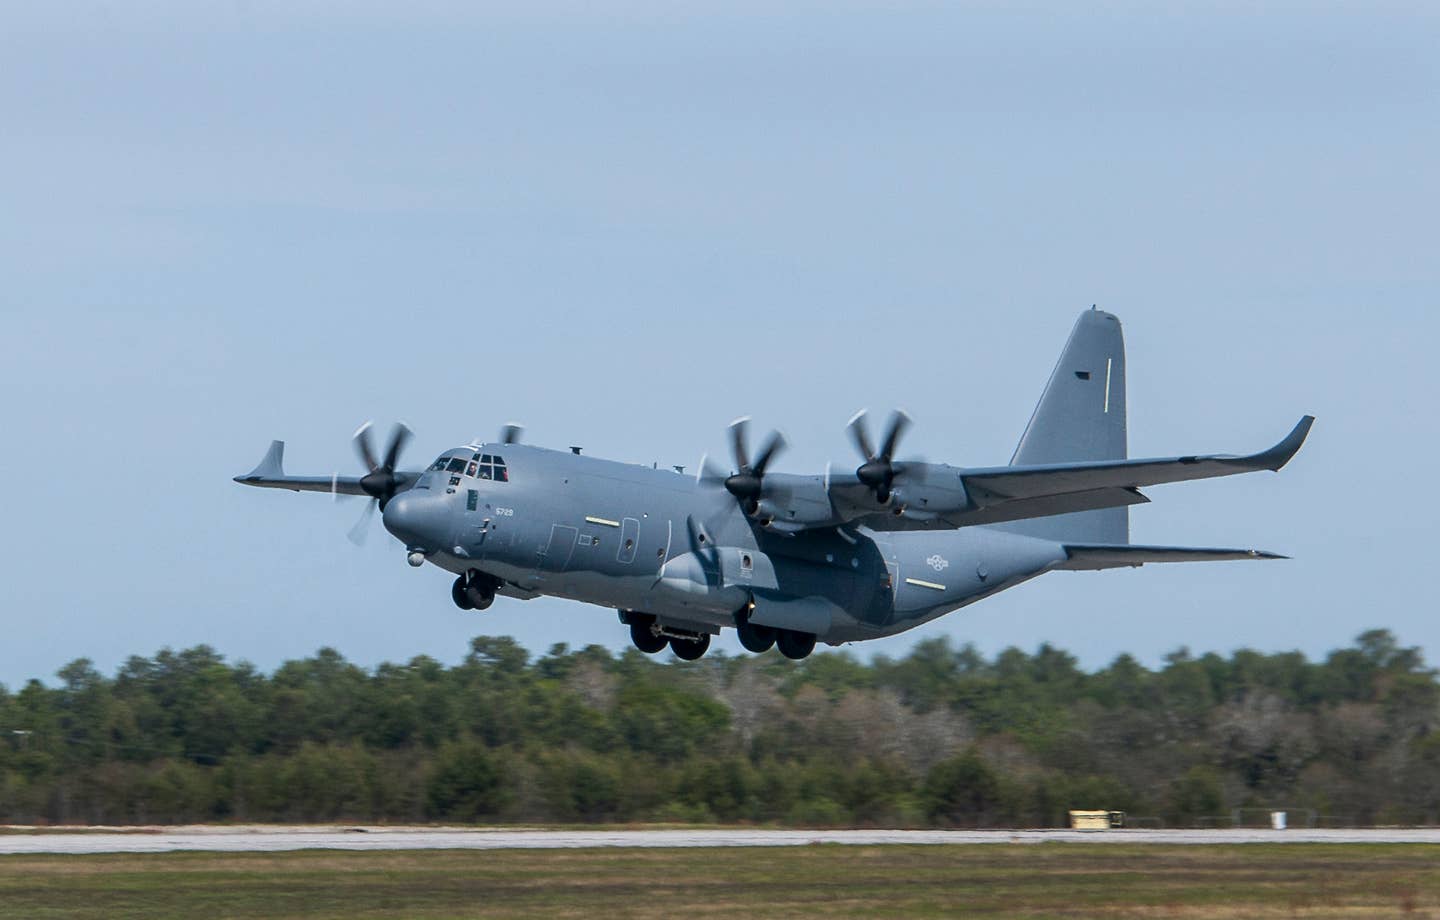 A MC-130J with the 413th Flight Test Squadron takes off. Note the winglets on the plane.